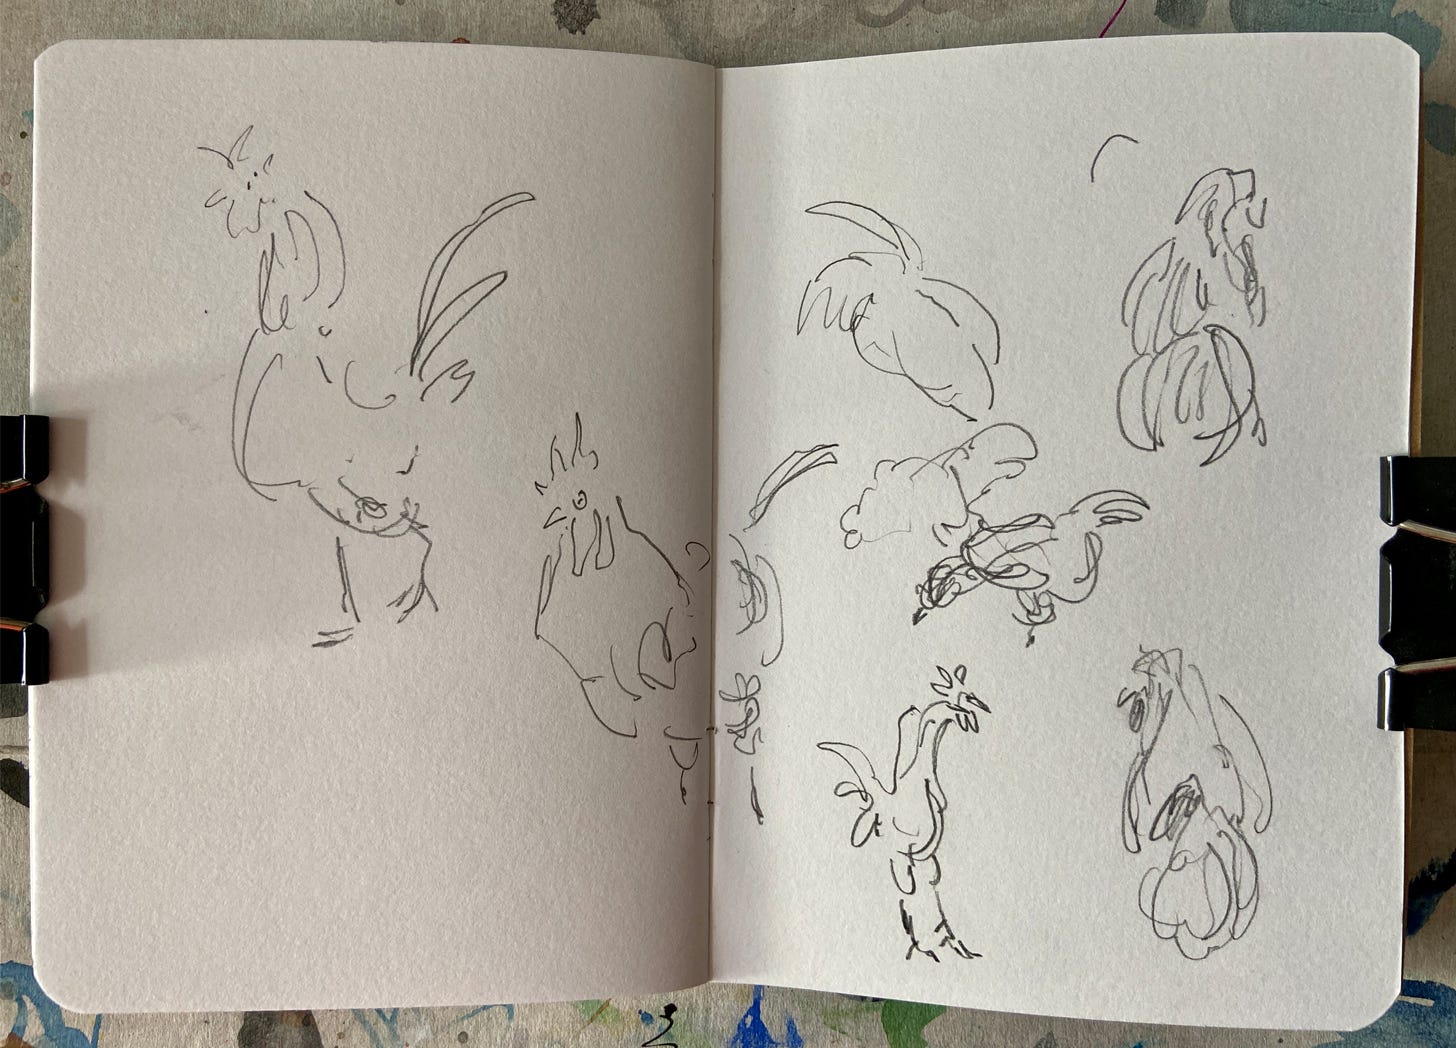 An open sketchbook with quickly drawn images of a rooster in a farmyard